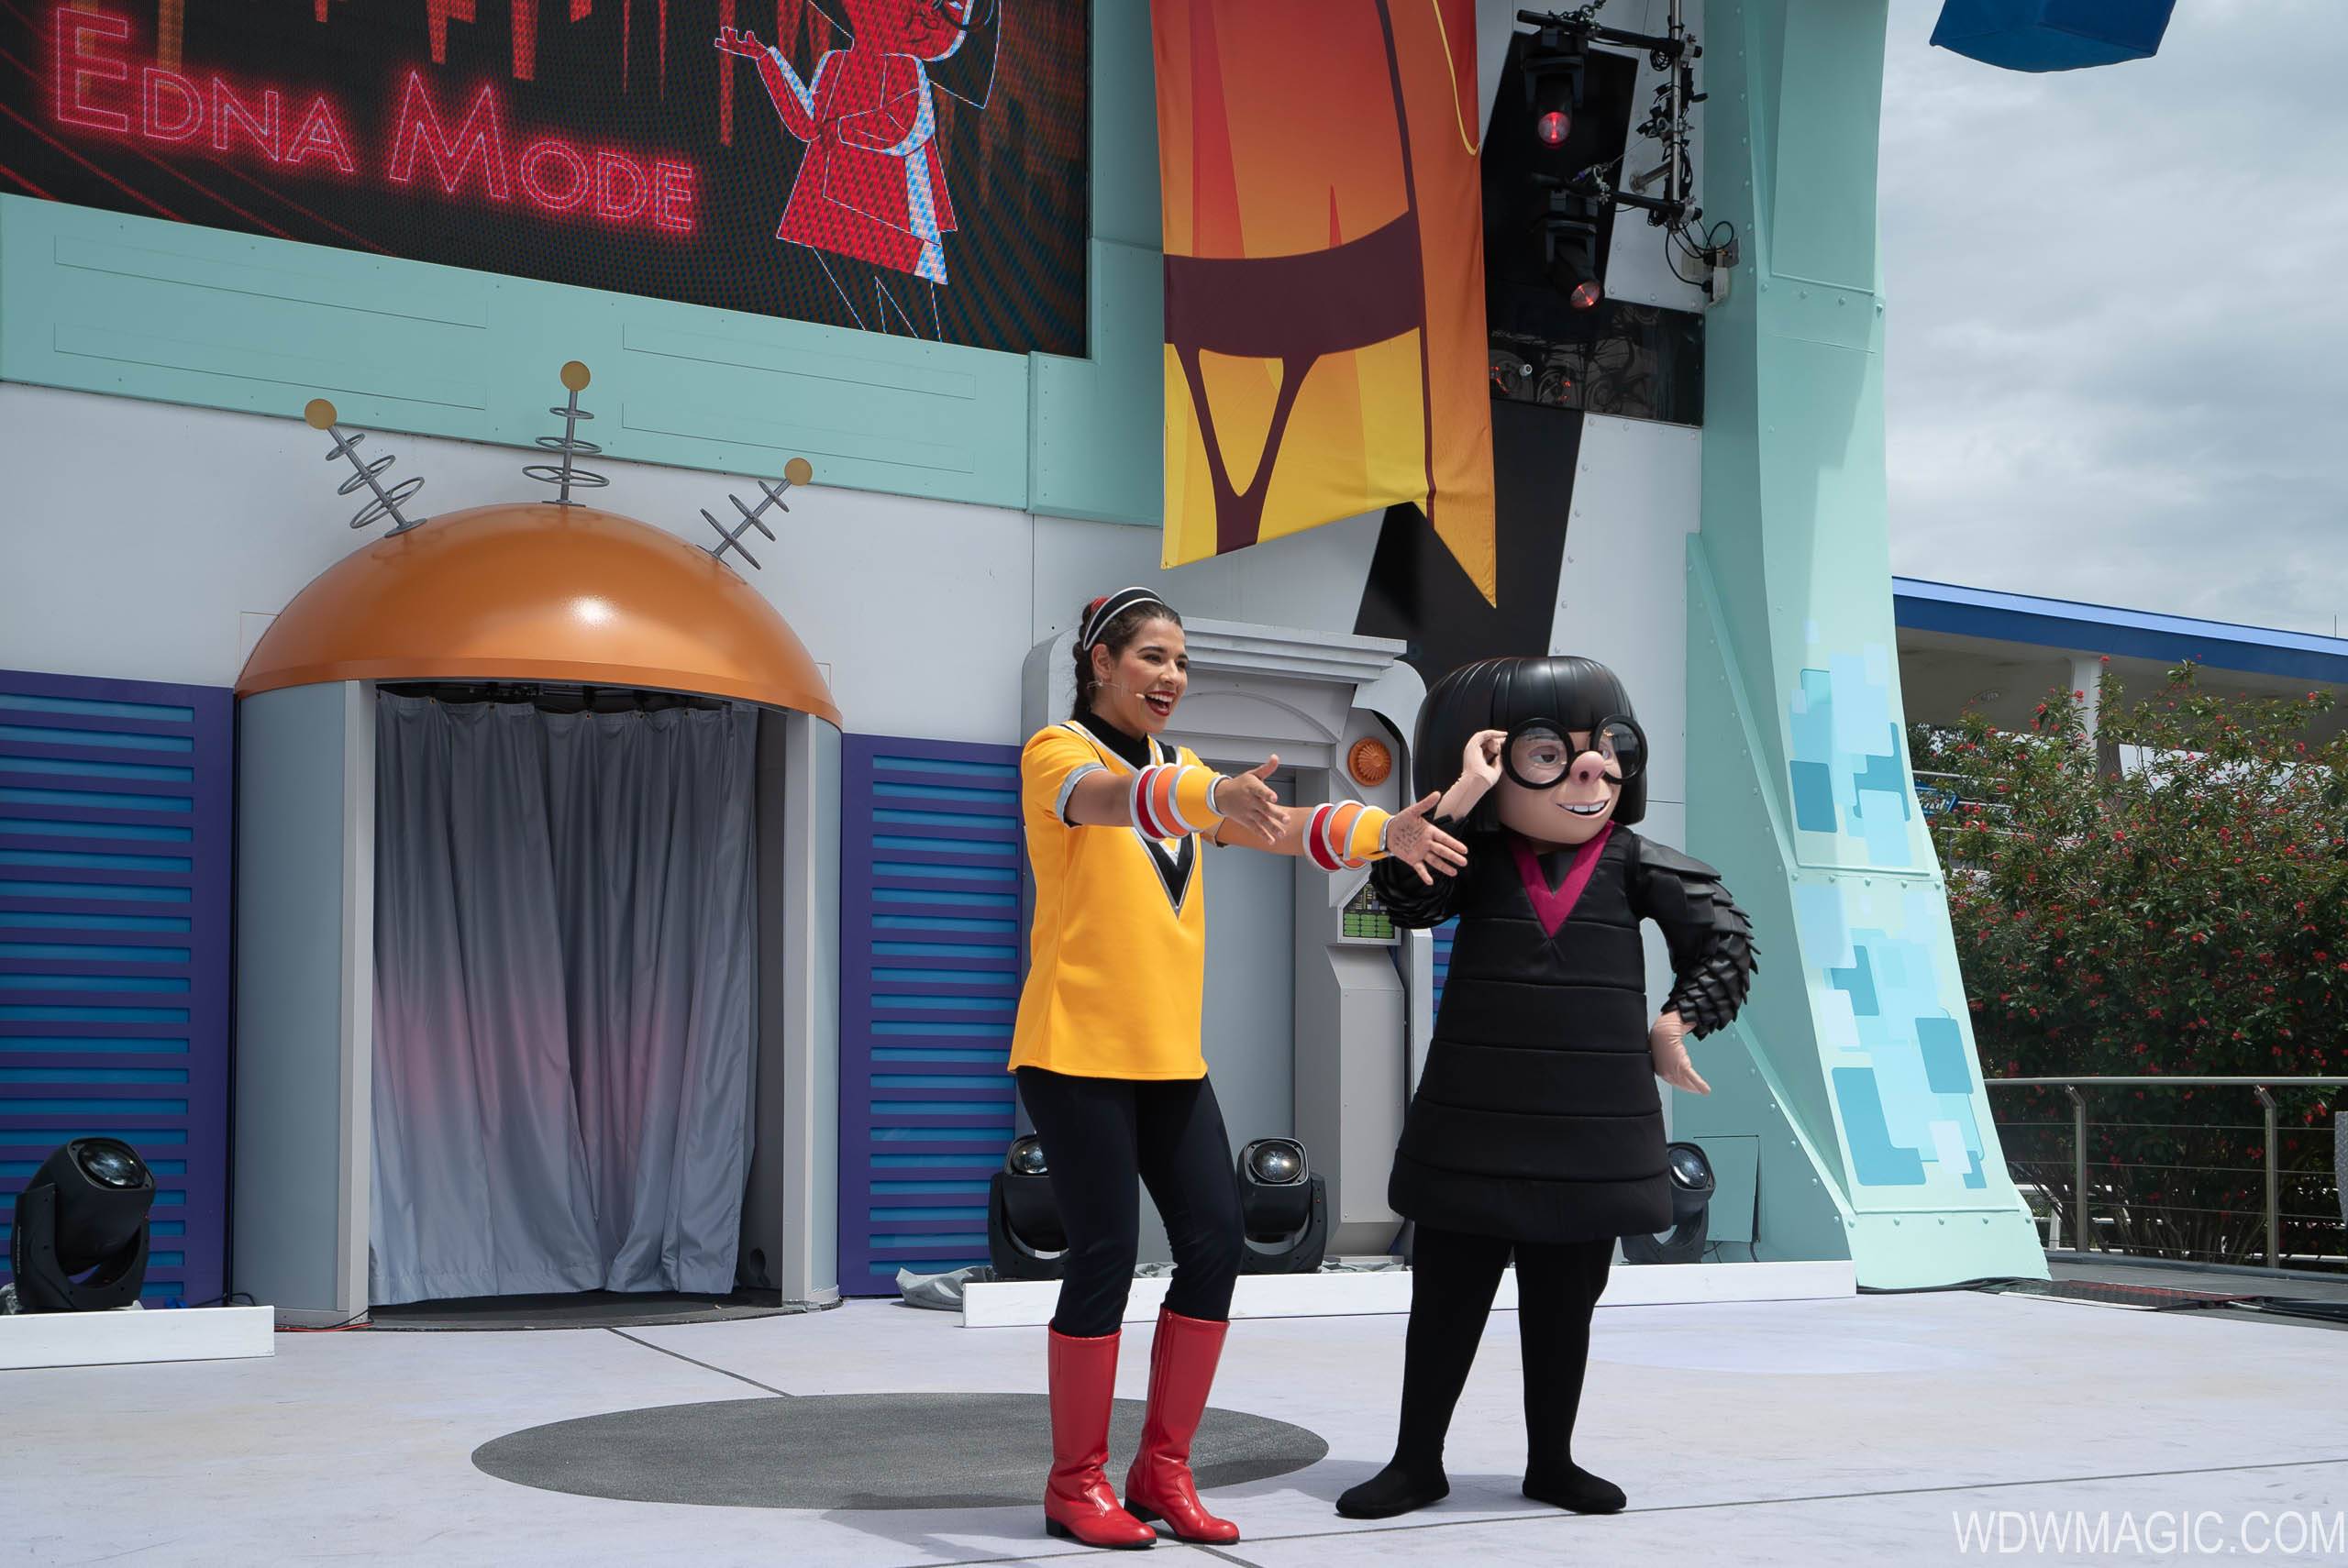 VIDEO - Edna Mode at the Incredible Tomorrowland Expo